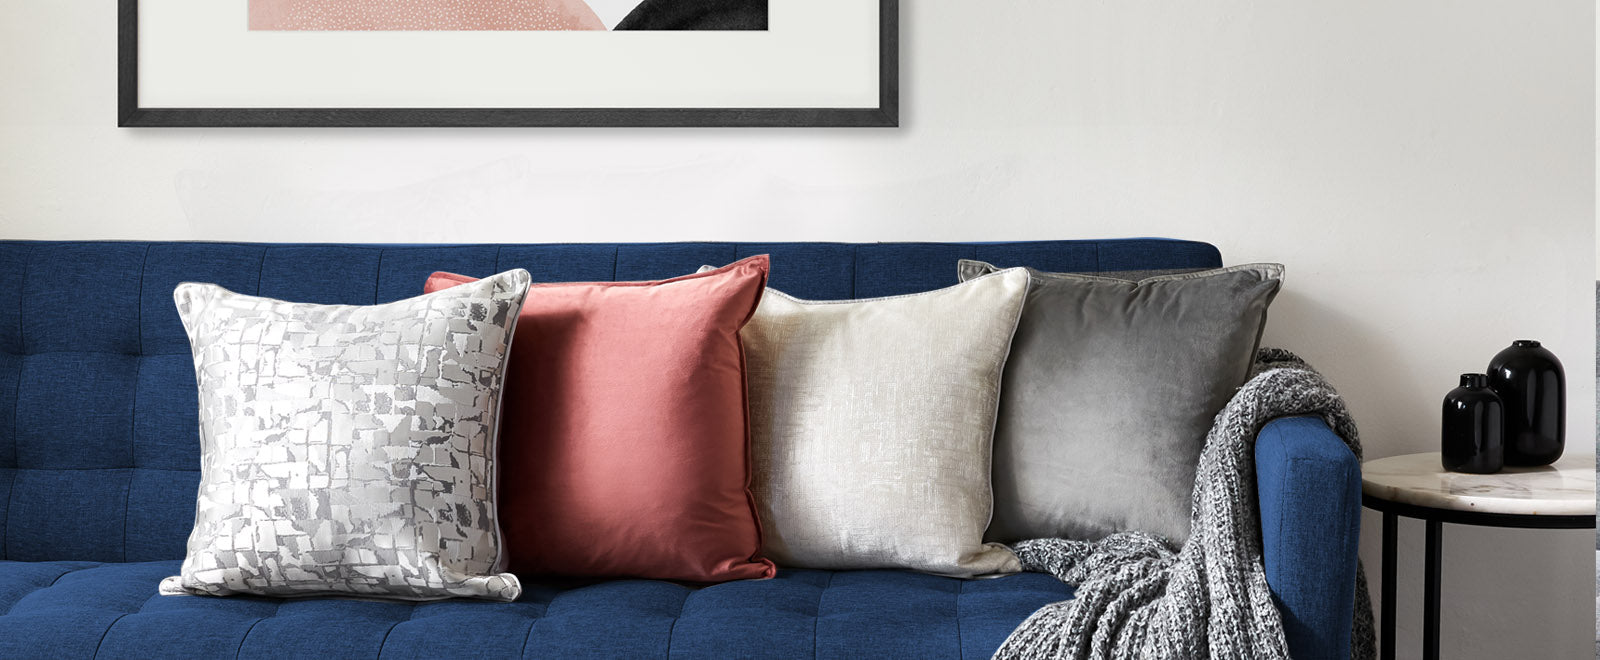 Styling Feather Cushions in 3 Easy Steps - An Interior Designer's Guide